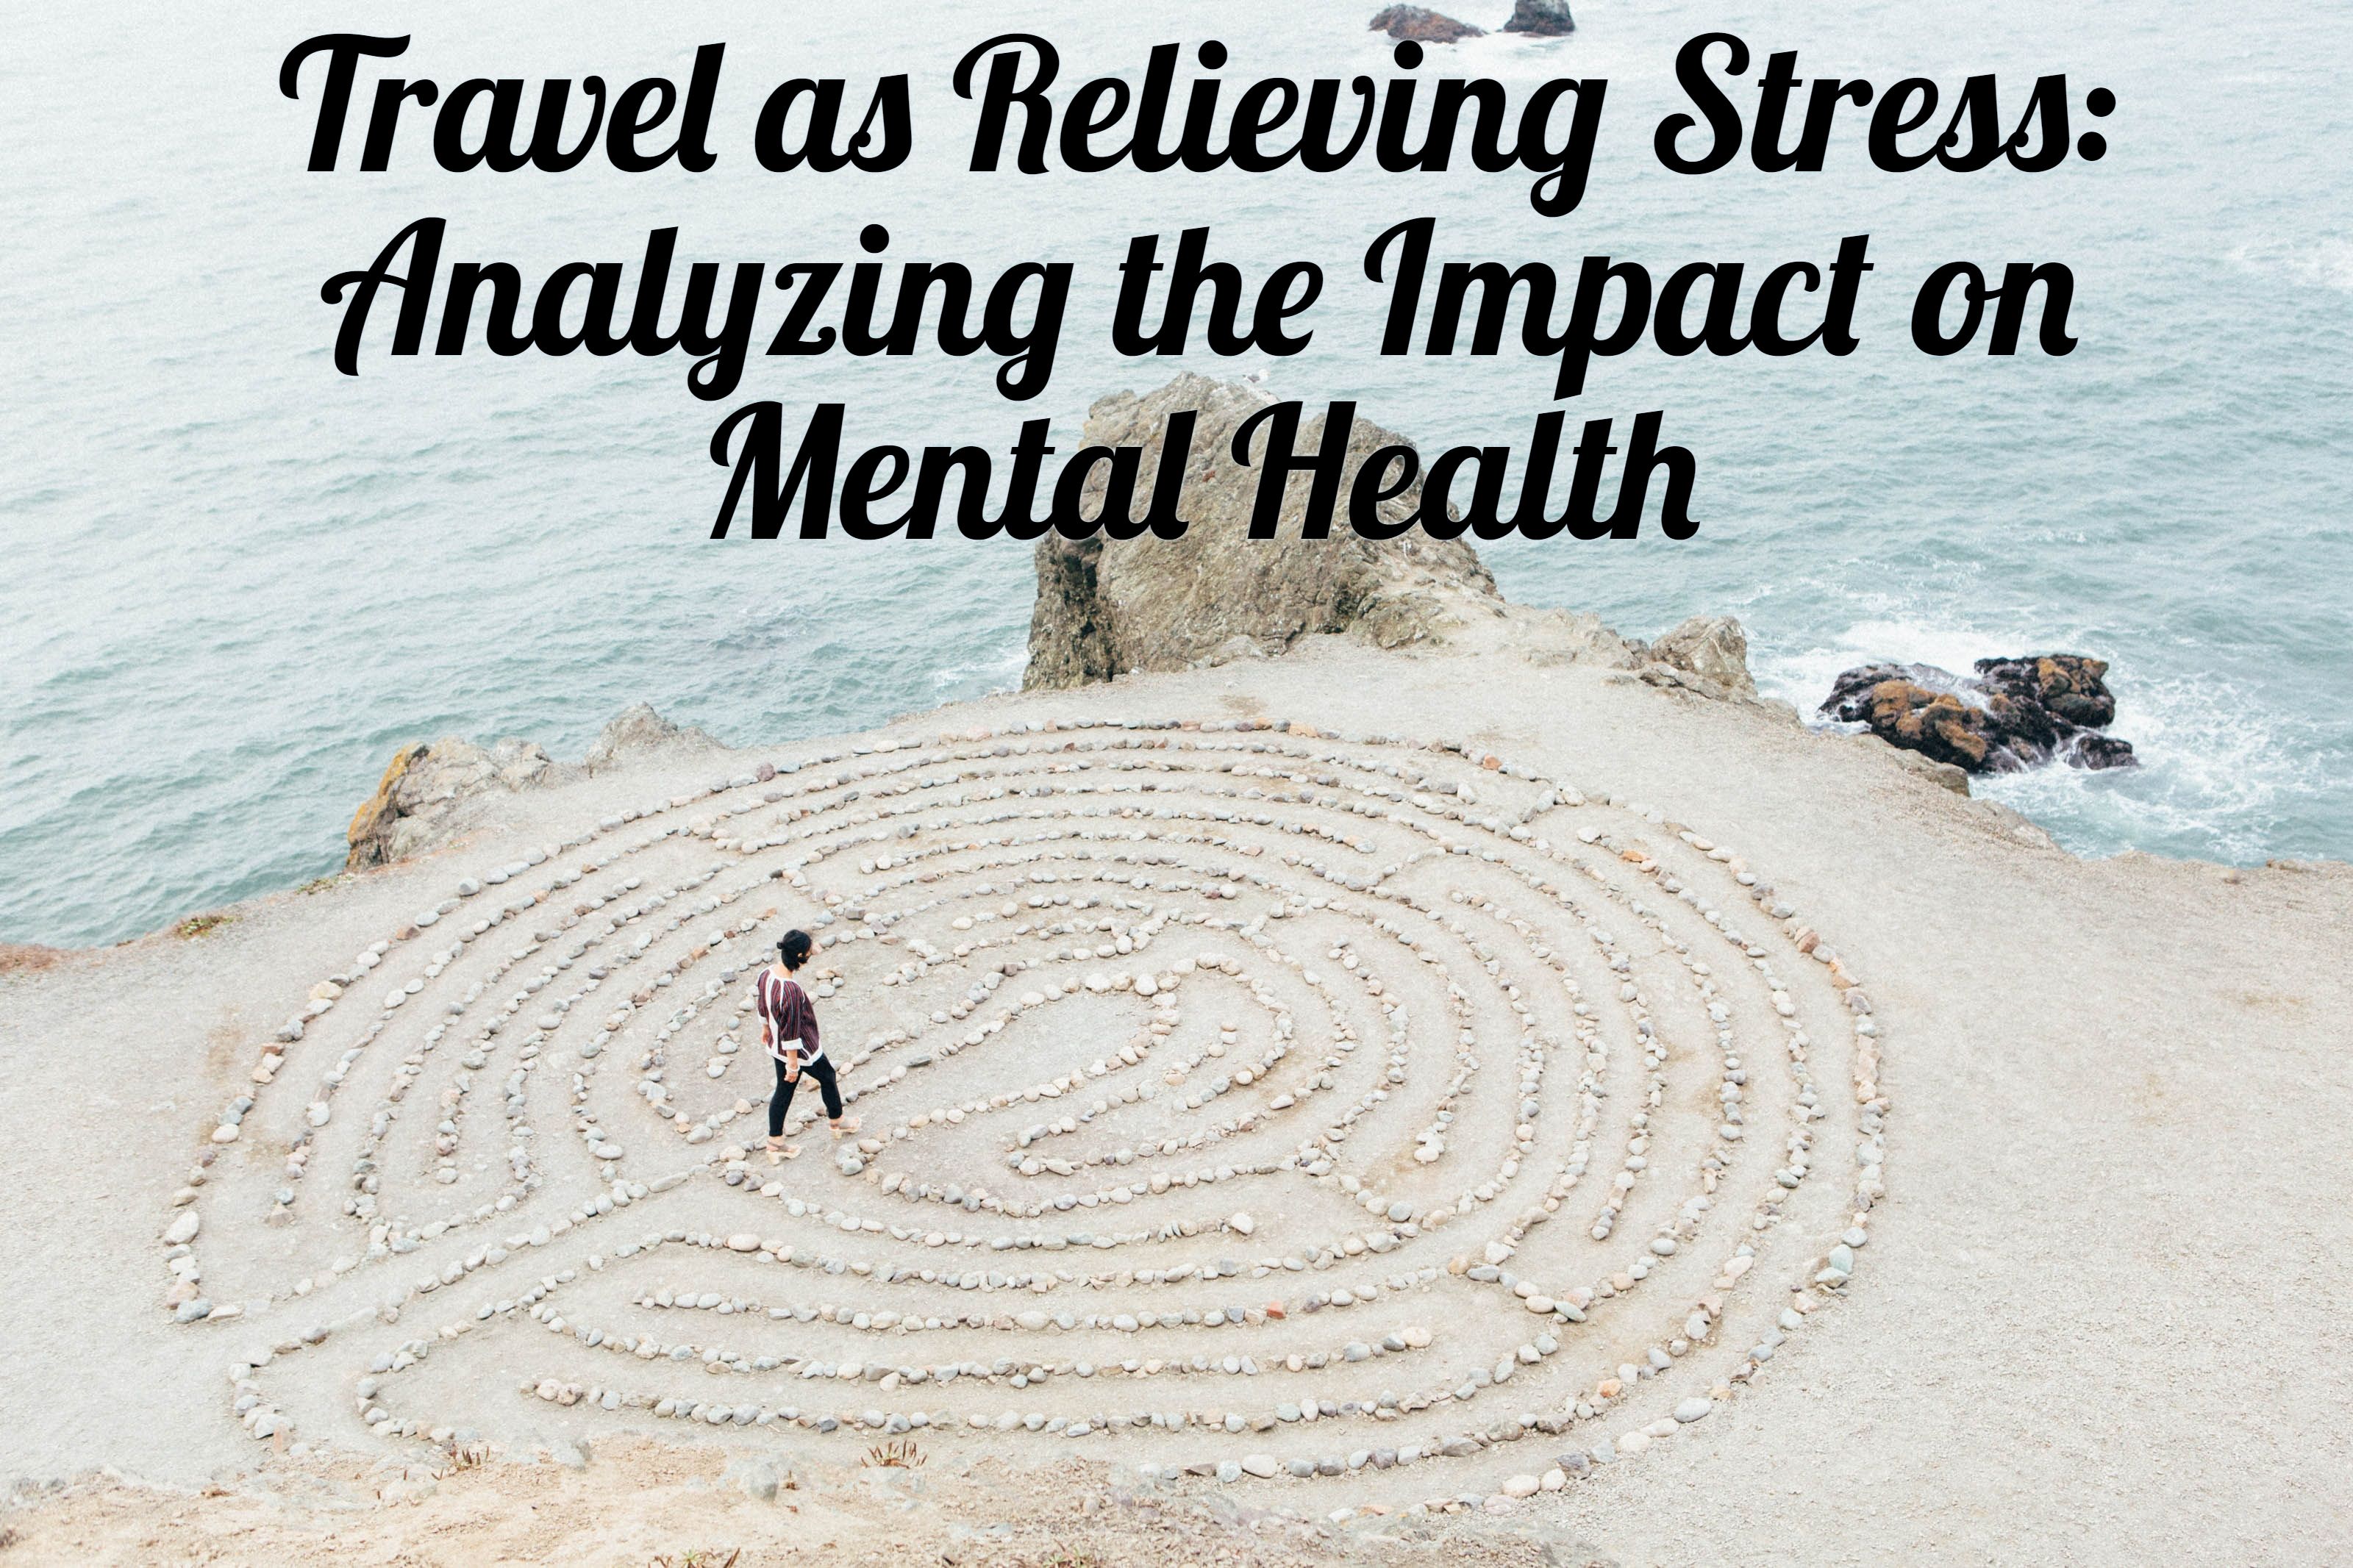 Travel as a Relieving Stress: Analyzing the Impact on Mental Health